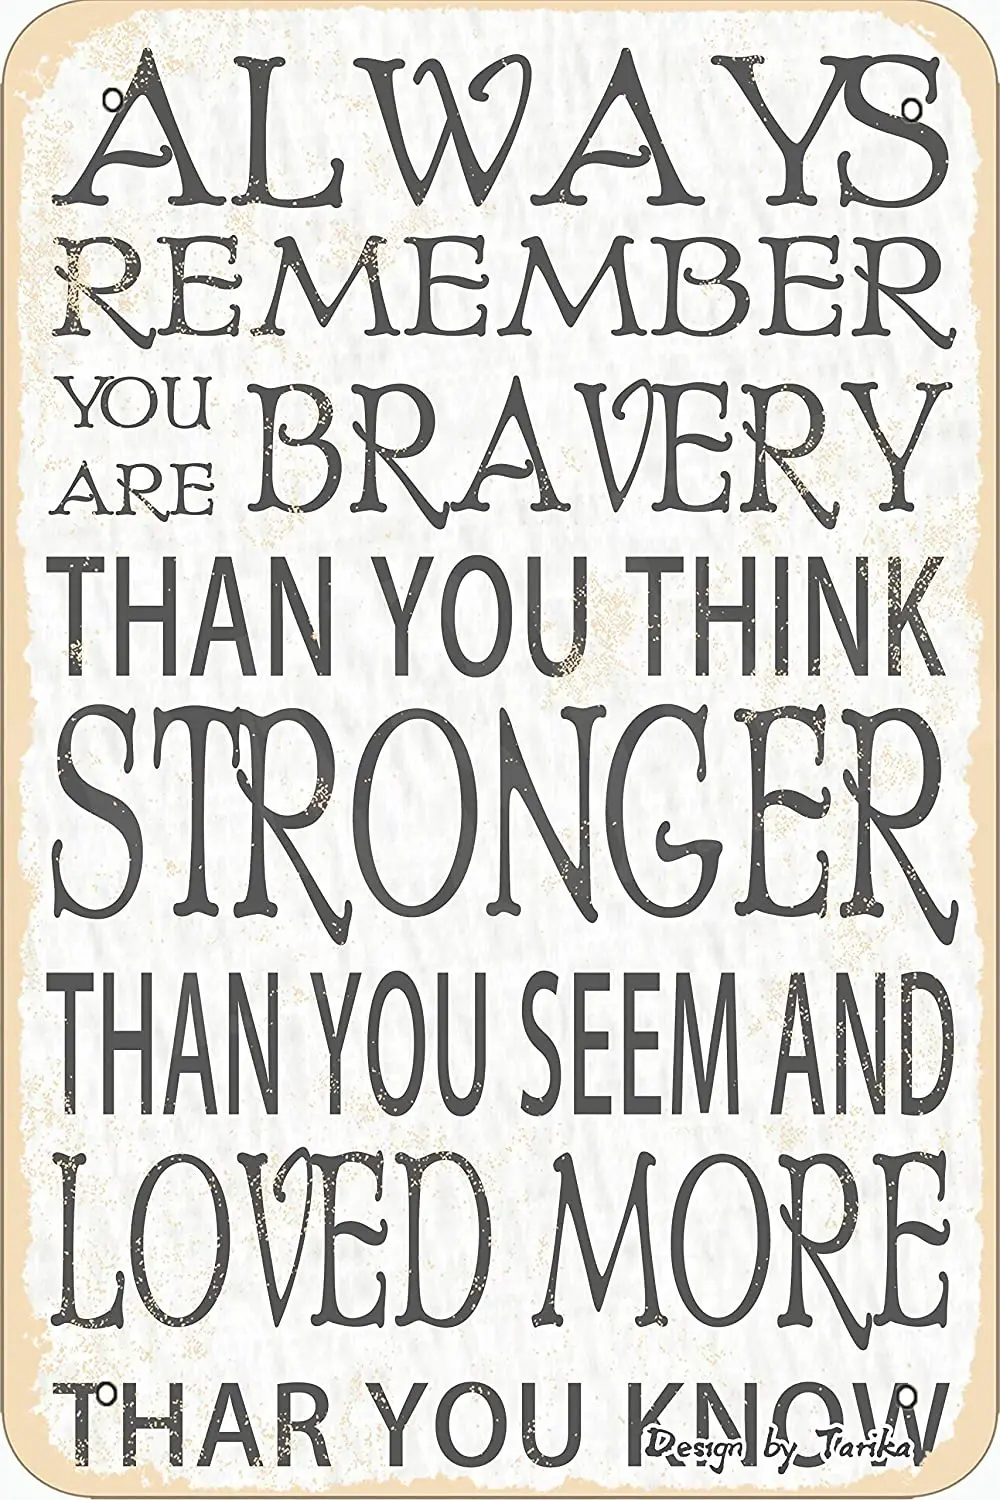 

Always Remember You are Bravery Than You Think Stronger Retro Look 20X30 cm Tin Decoration Plaque Sign for Home Wall Decor